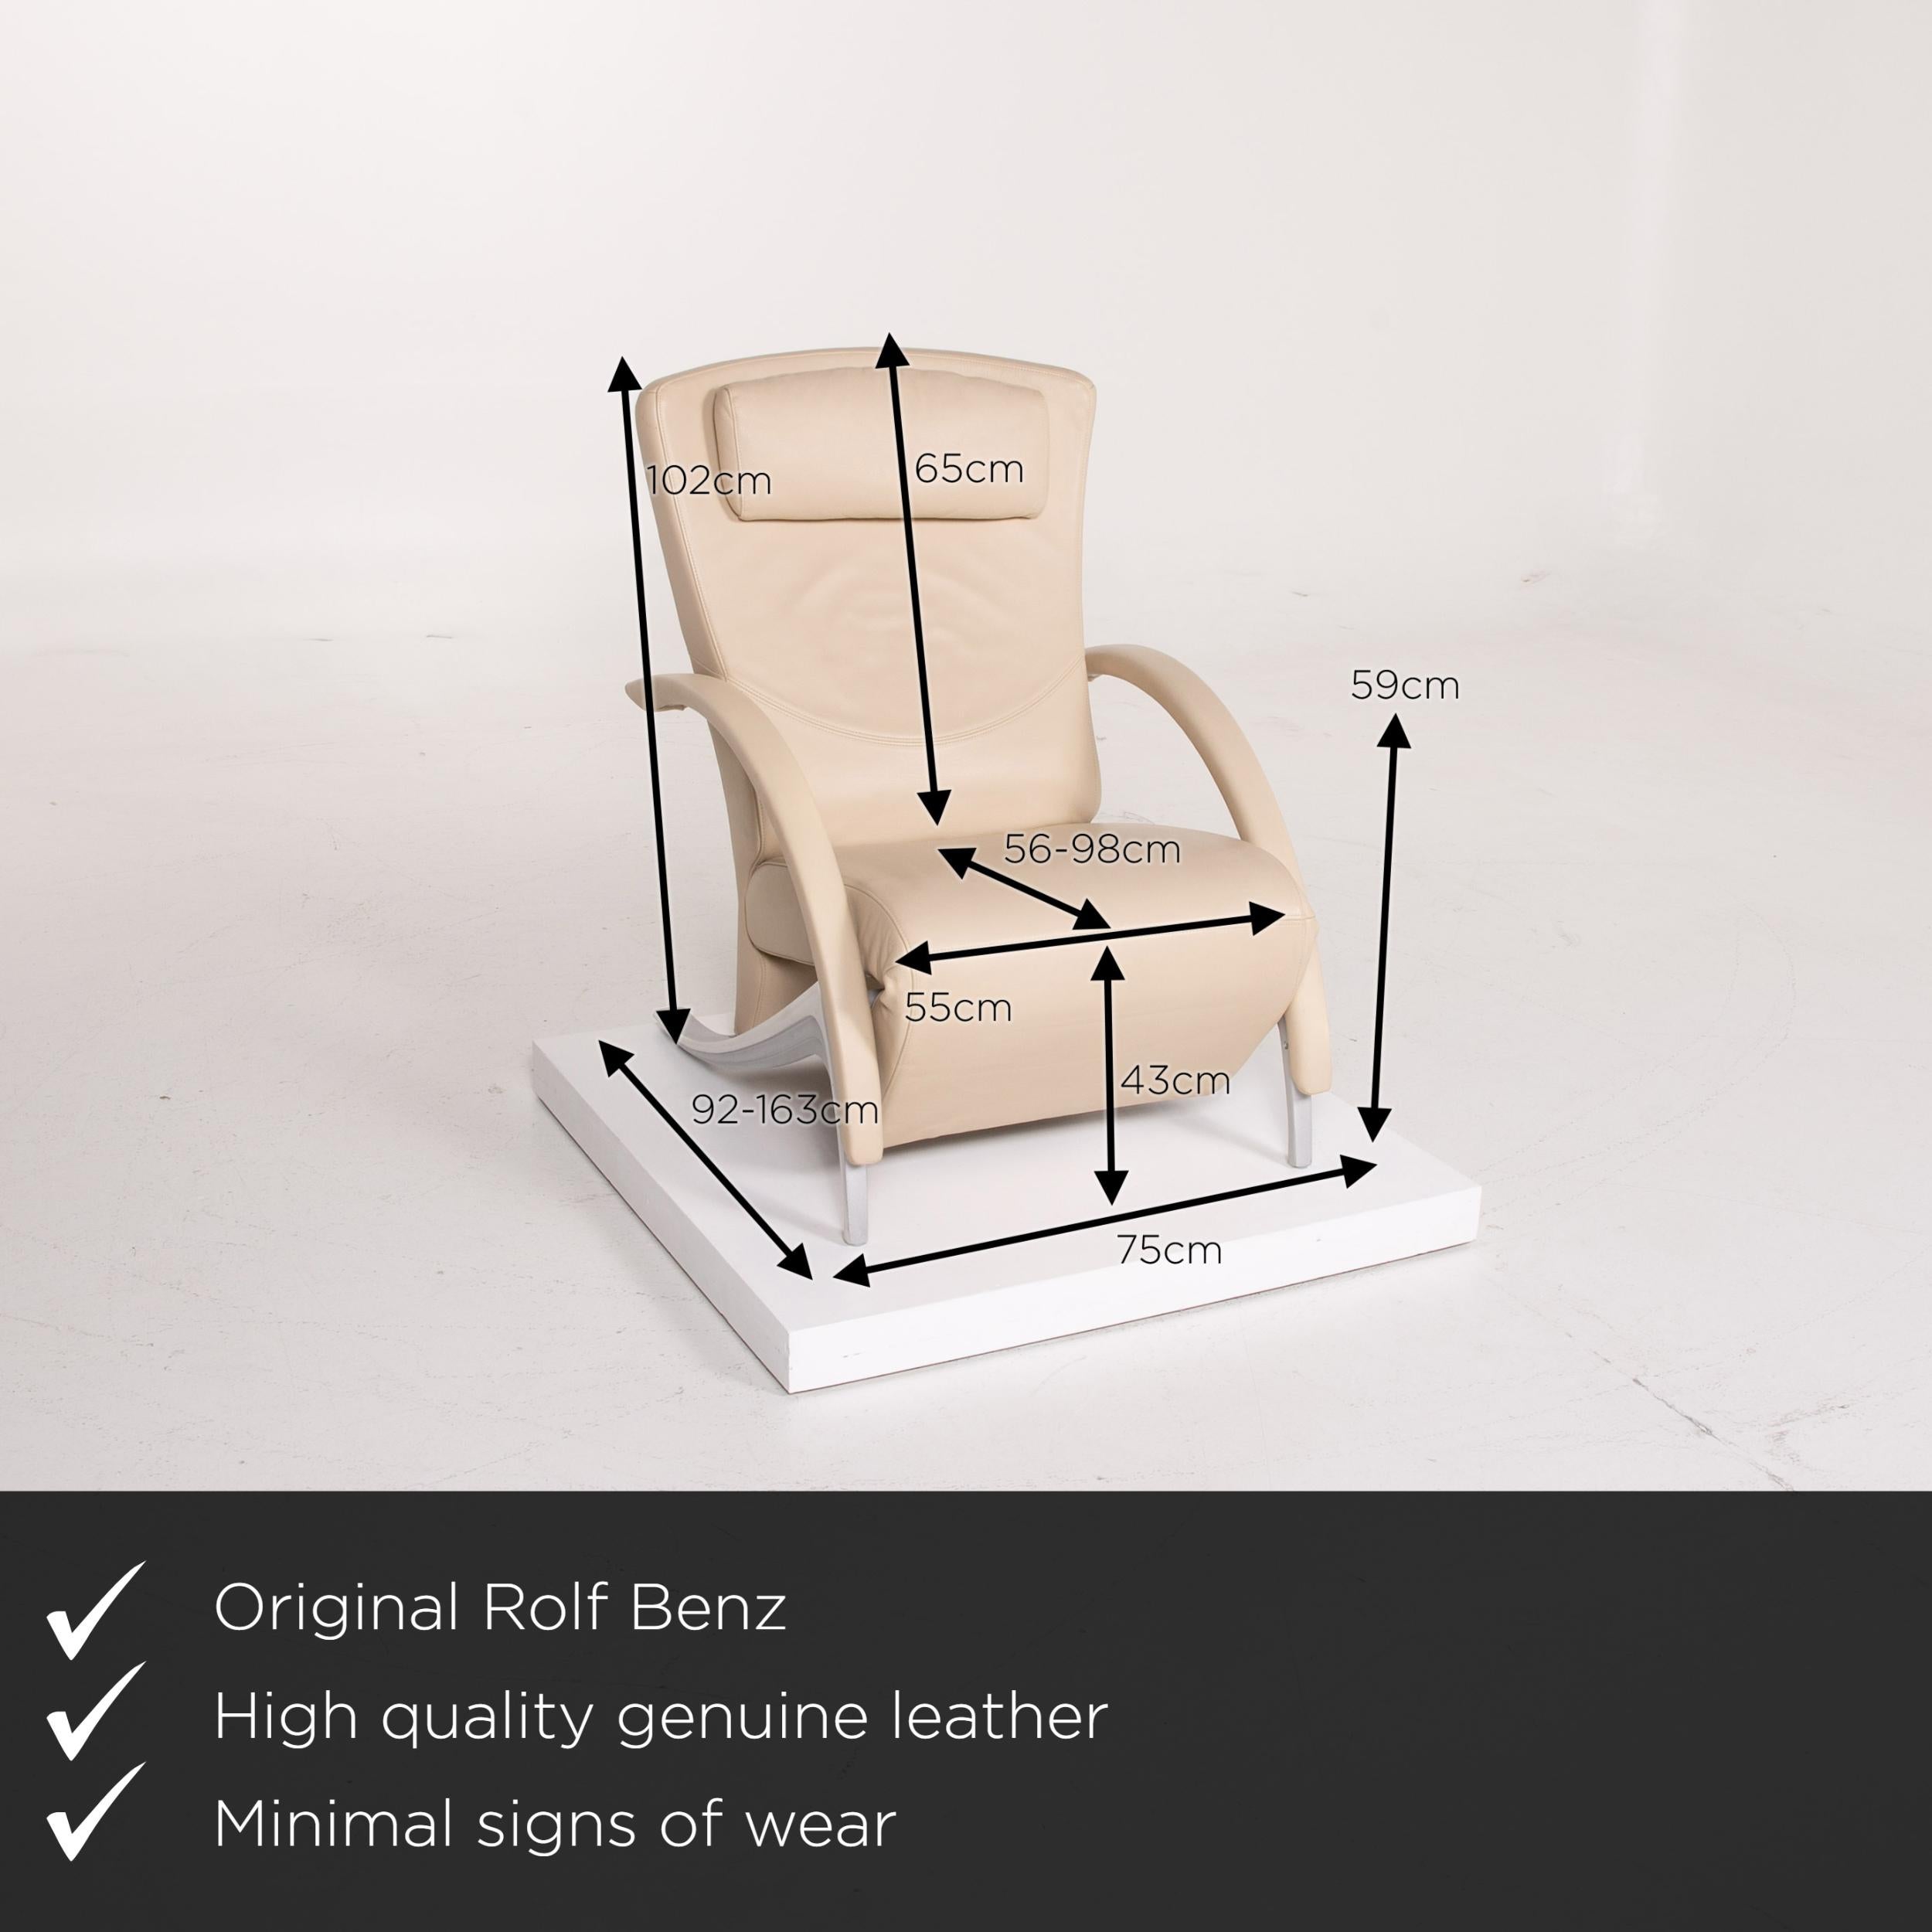 We present to you a Rolf Benz 3100 leather armchair cream lounger.
 
 

 Product measurements in centimeters:
 

Depth 92
Width 75
Height 102
Seat height 43
Rest height 59
Seat depth 56
Seat width 55
Back height 65.